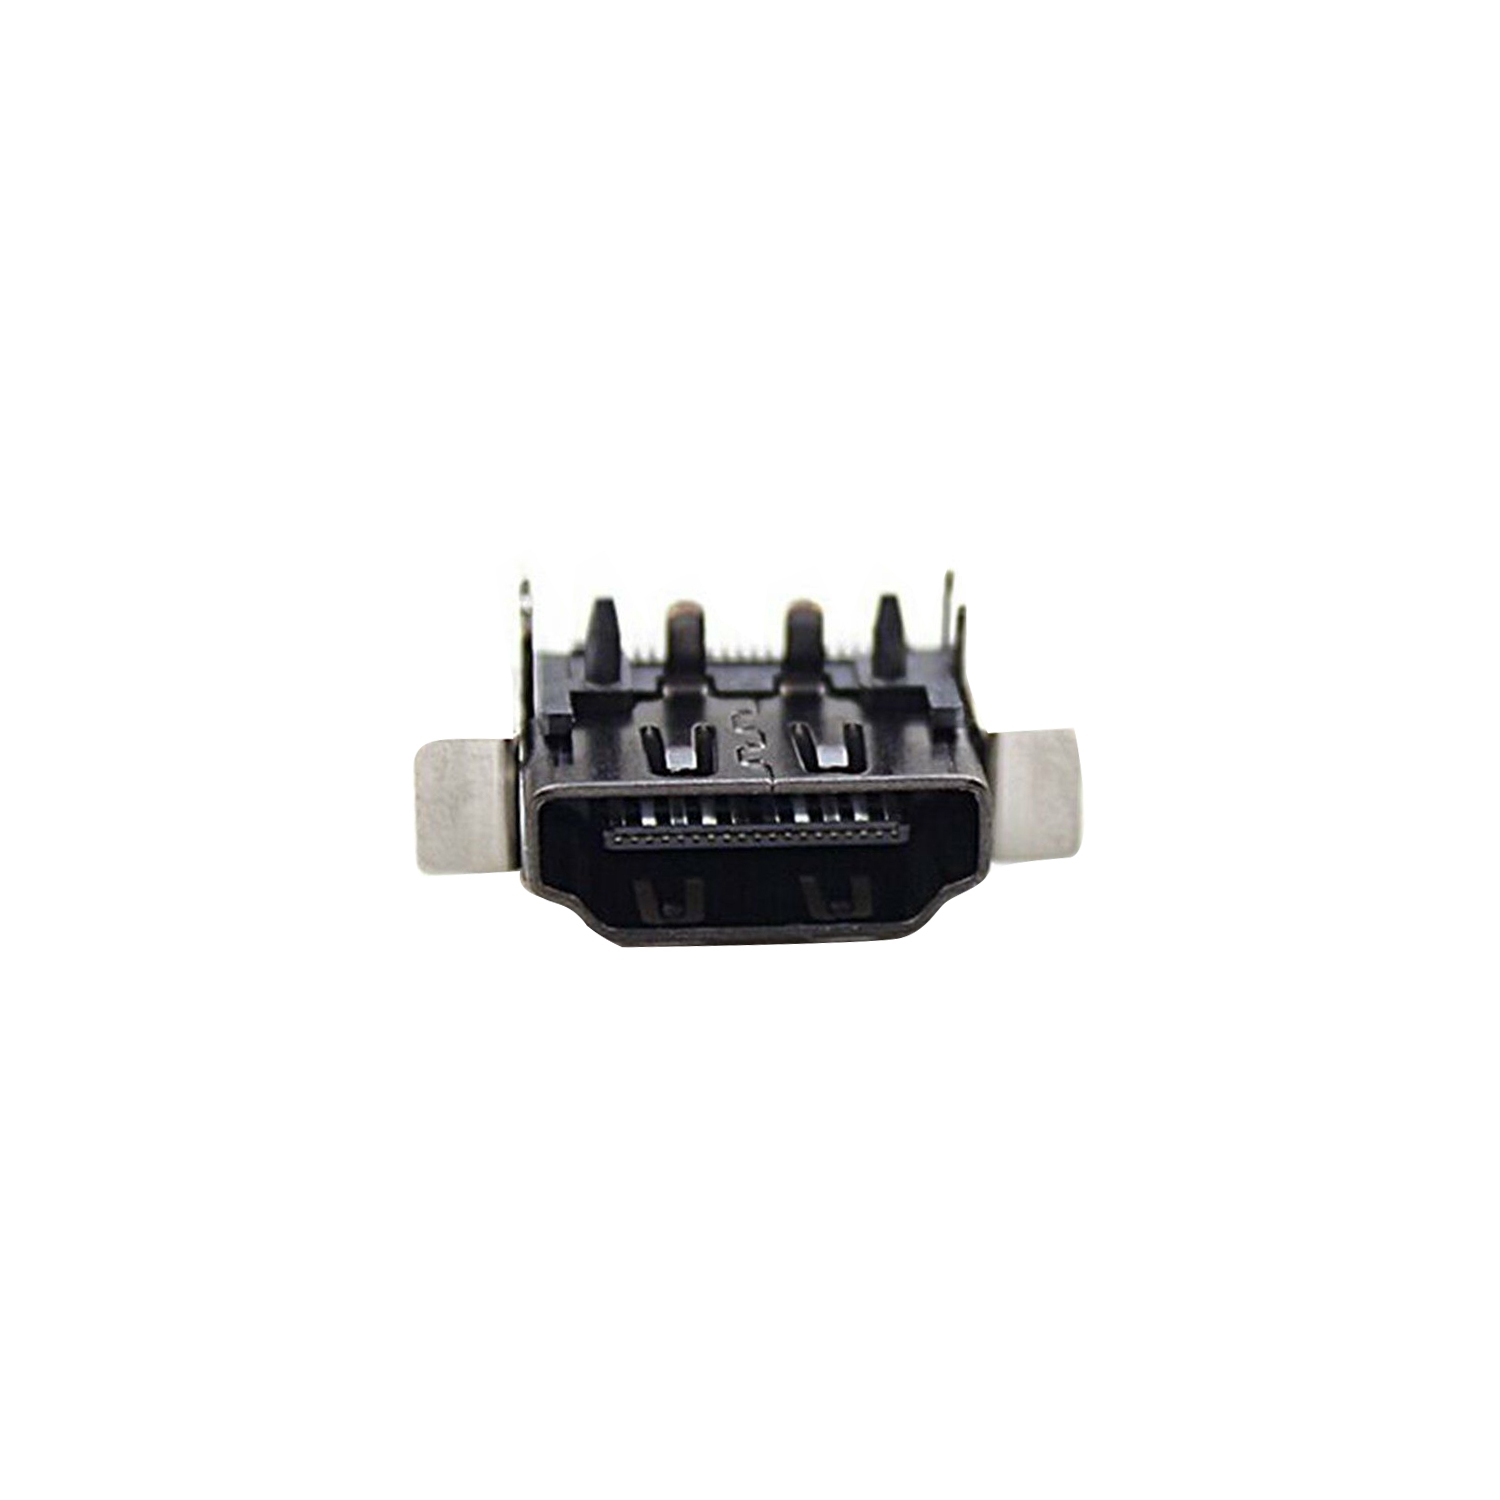 Replacement HDMI Socket Port Connector For Microsoft Xbox One X